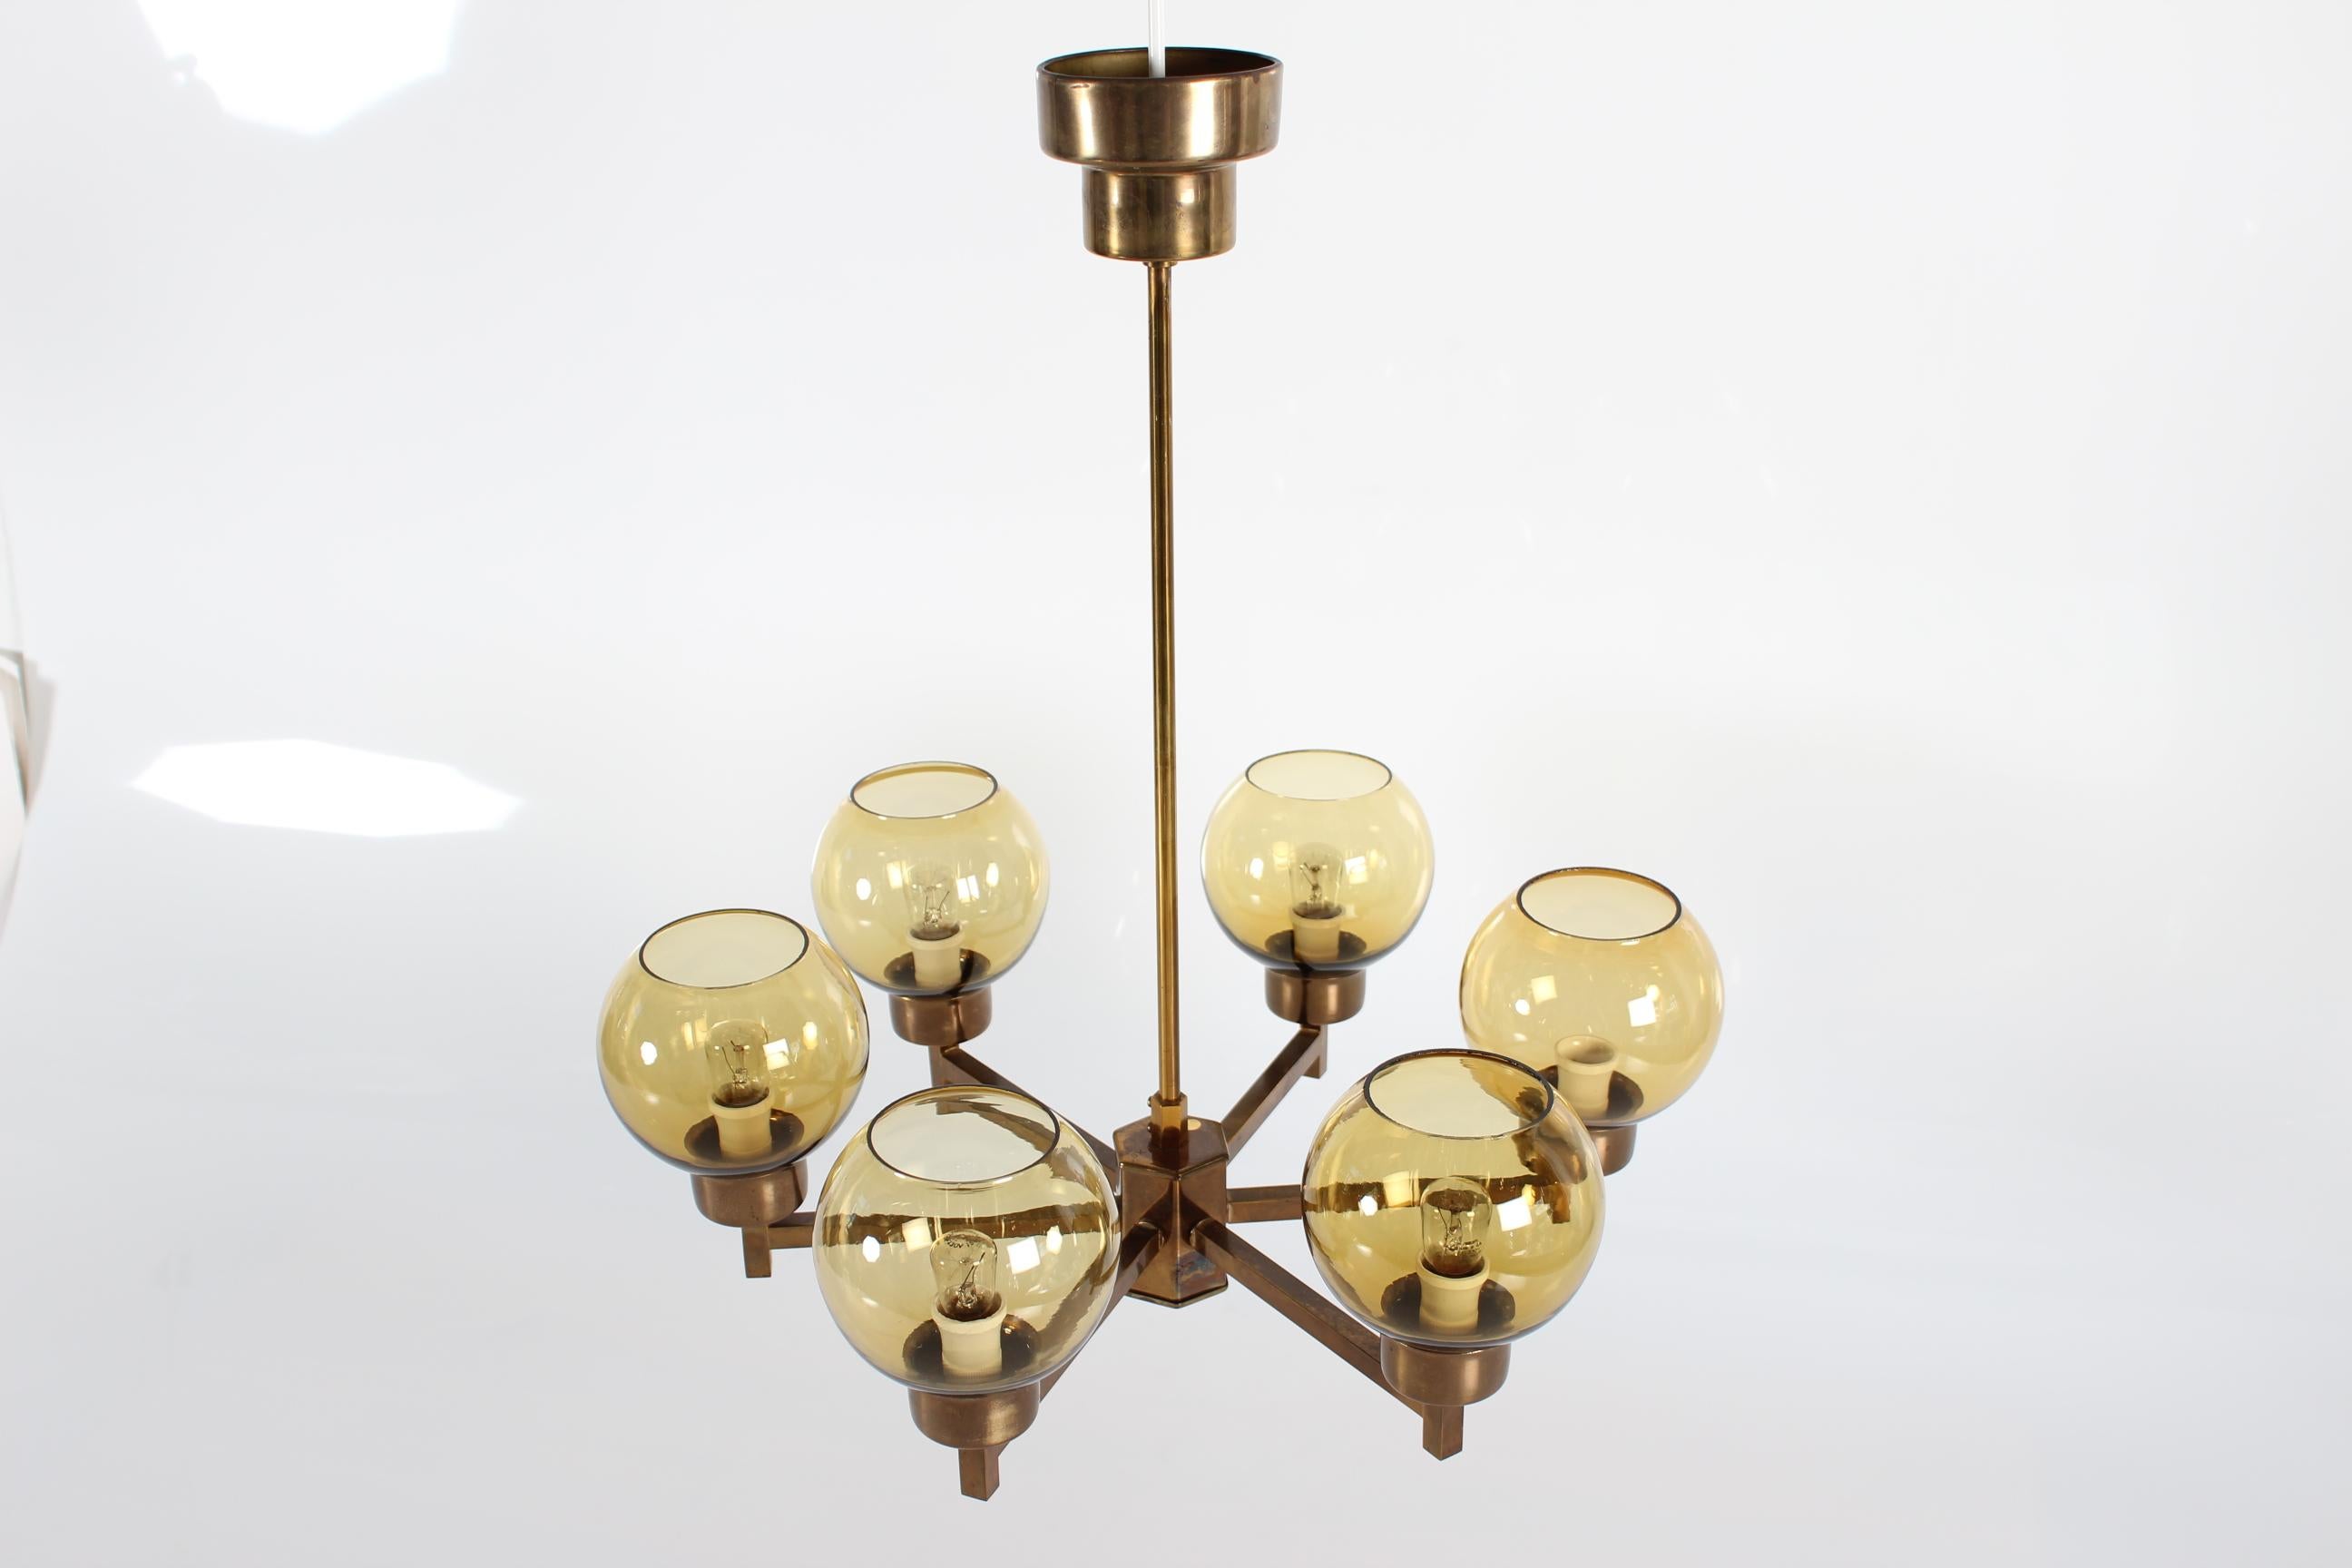 20th Century Hans Agne Jakobsson Style Six-Armed Chandelier of Brass and Glass Sweden 1970s For Sale